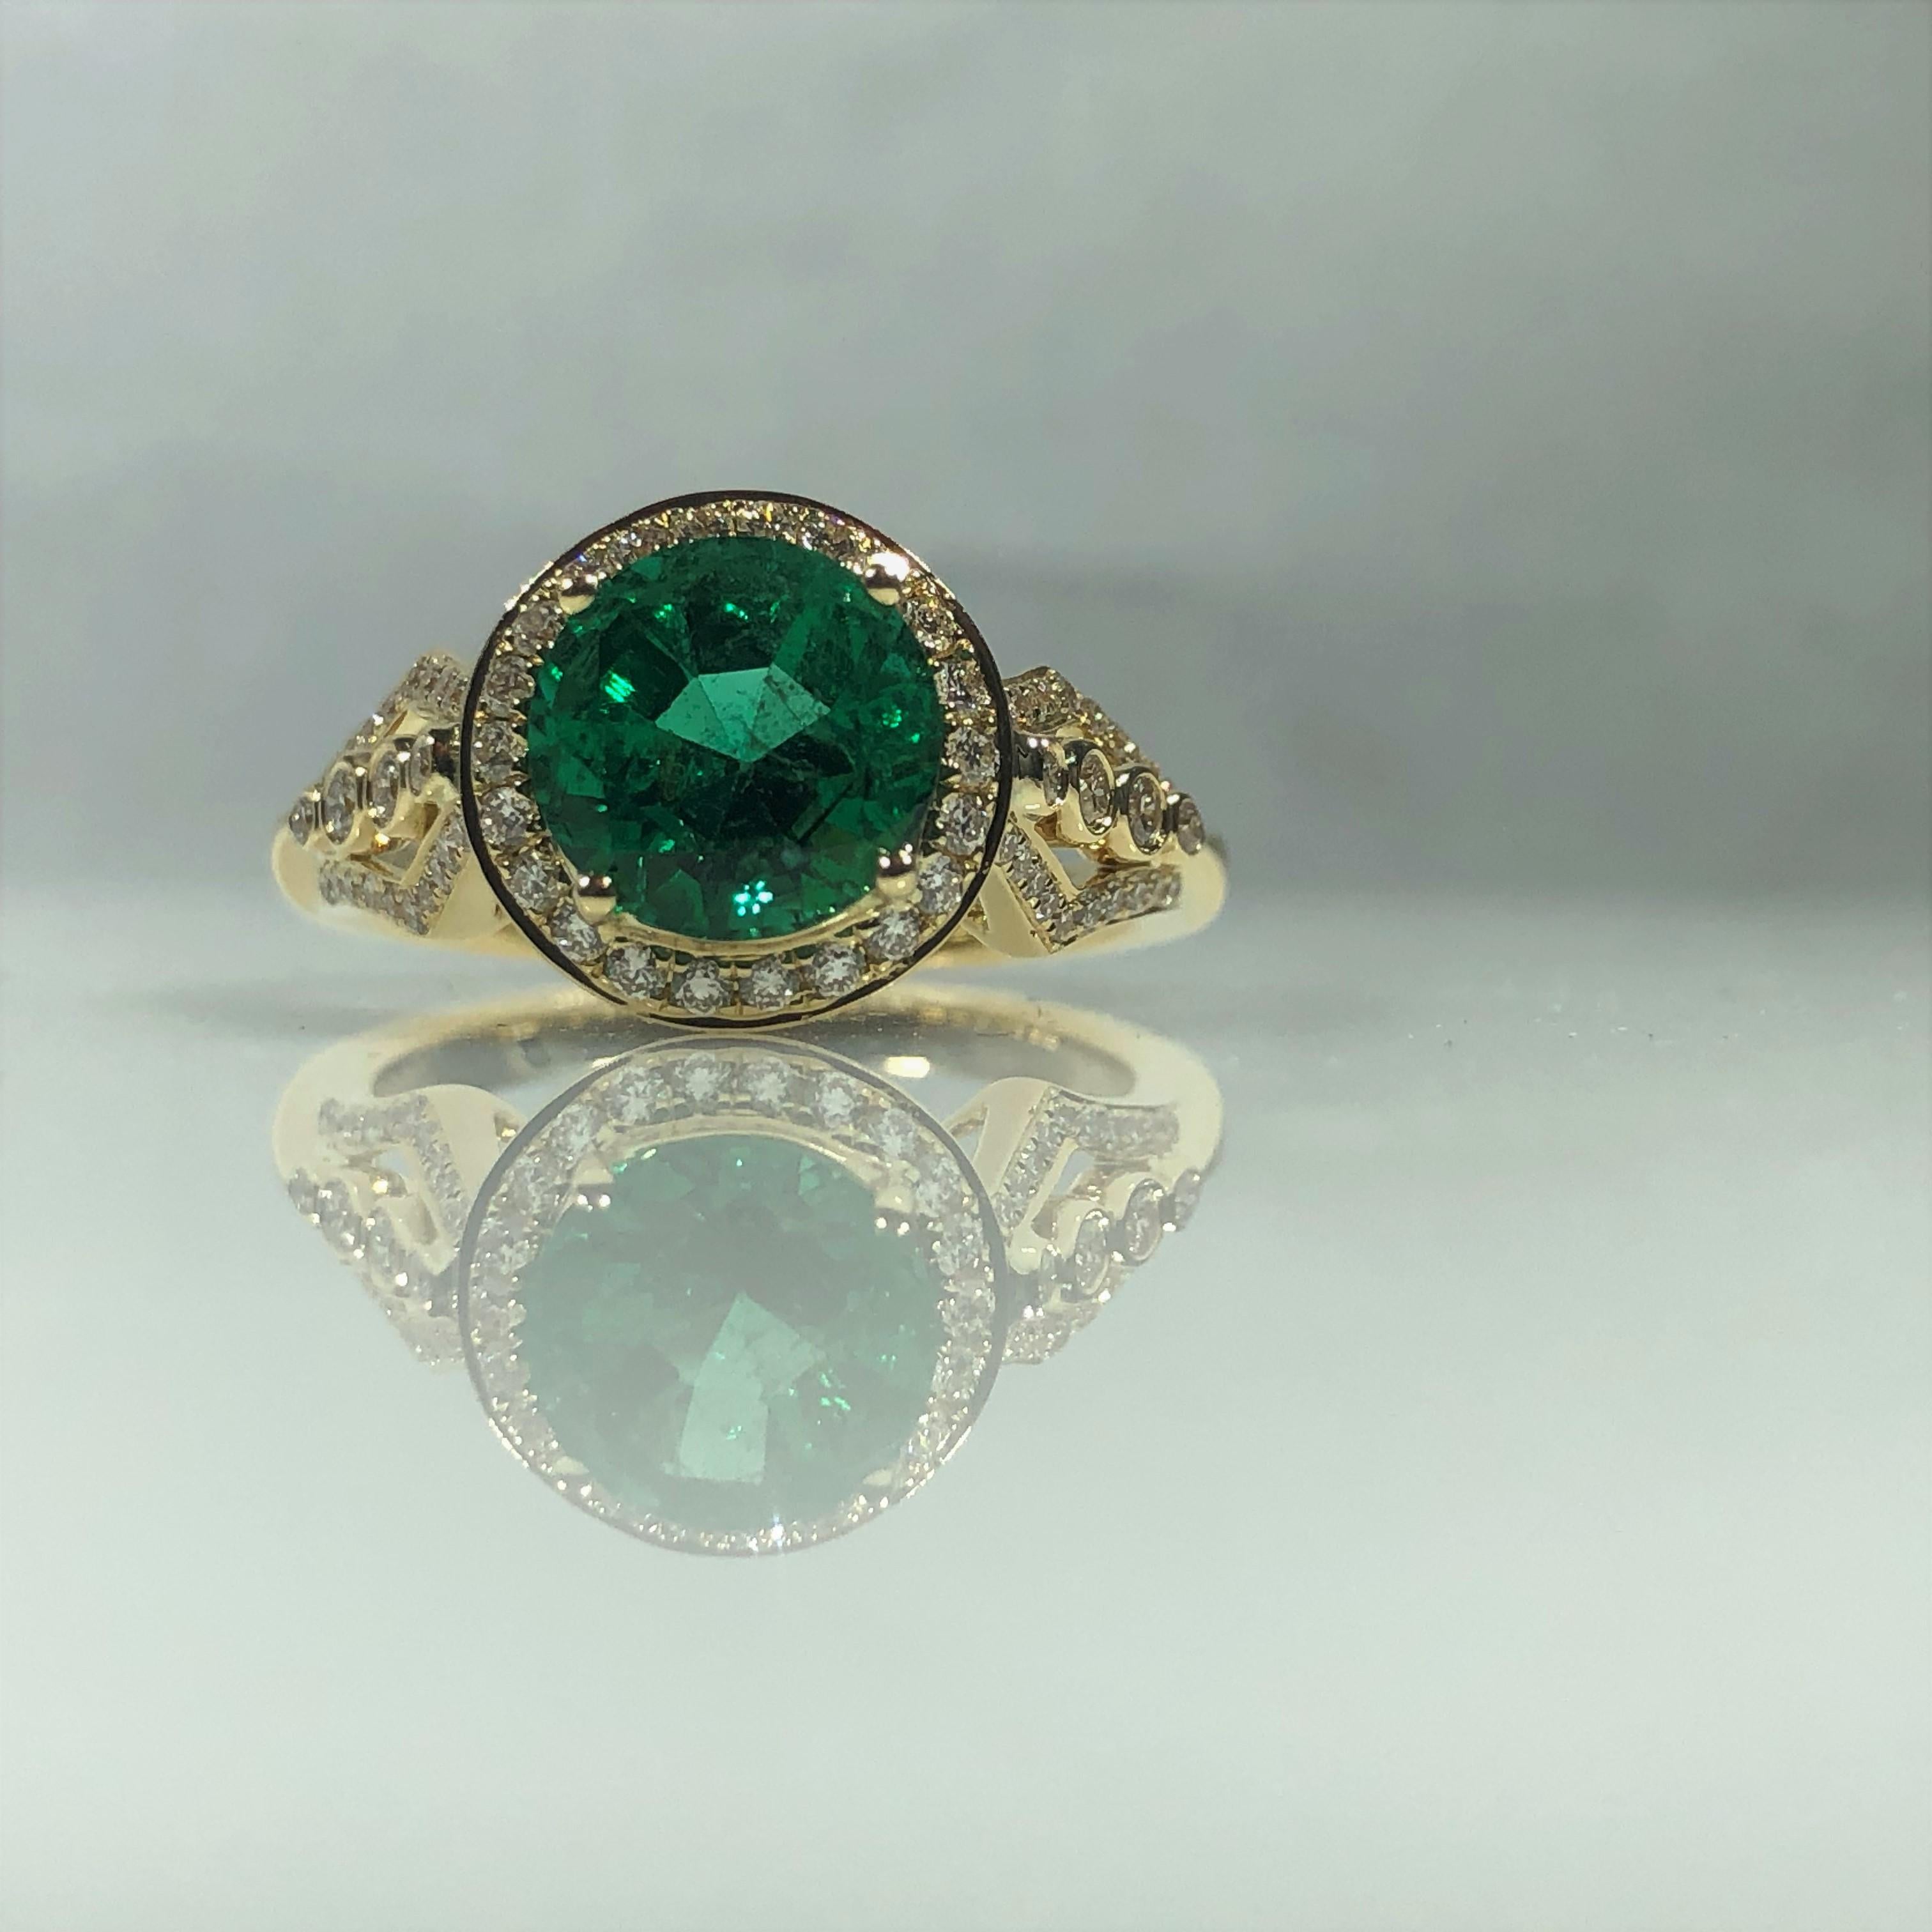 Philip Zahm Designs 18 KT 1.81 ct Round Zambian Emerald and Diamond RIng. This stunning creation is designed in 18 kt yellow gold, gold weight 5.7 grams. The Center stone is a  four prong set, round, 1.81 carat  Zambian Emerald. Emerald is 8.03mm in